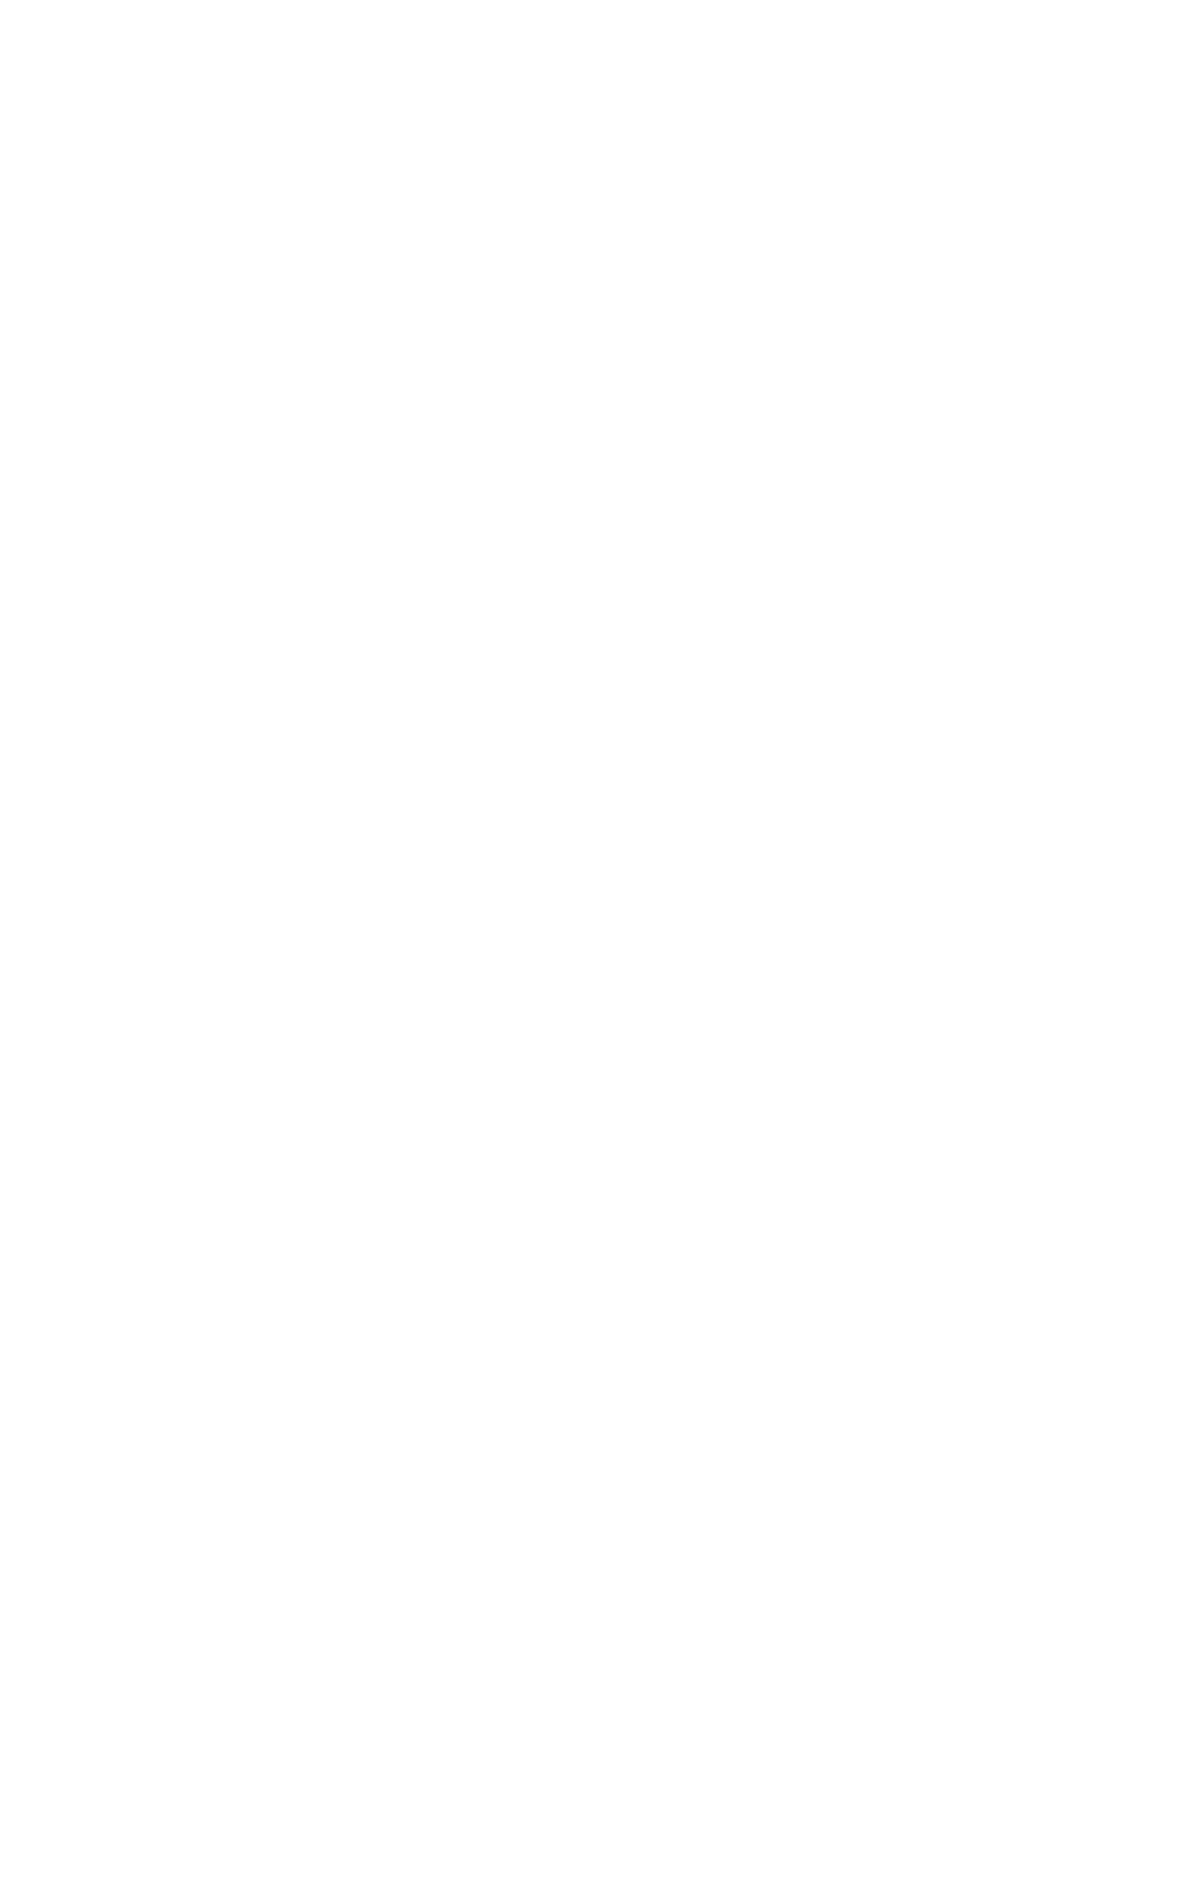 Highlights differences